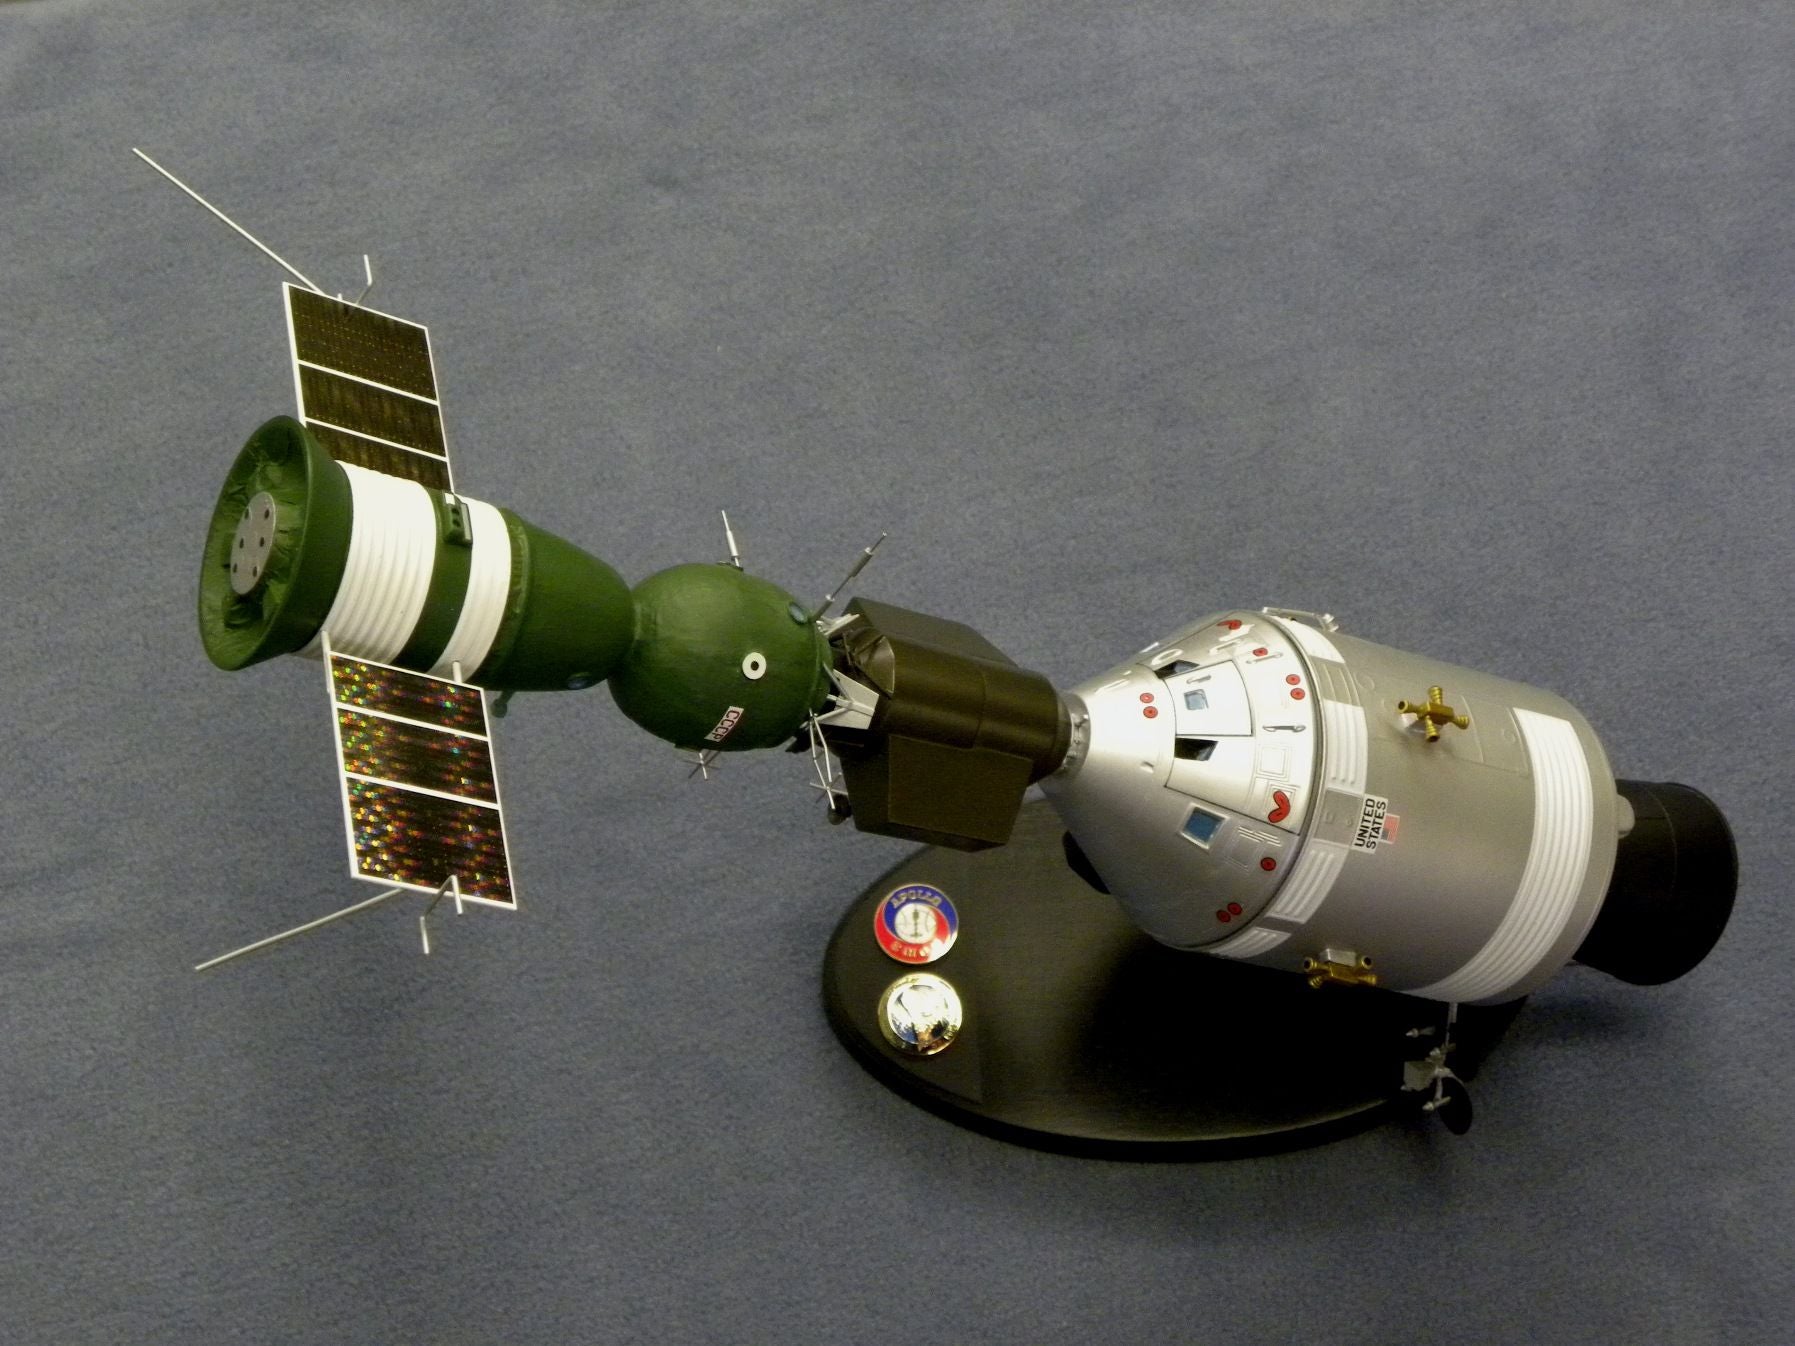 Apollo Soyuz Test Project - The Space Store